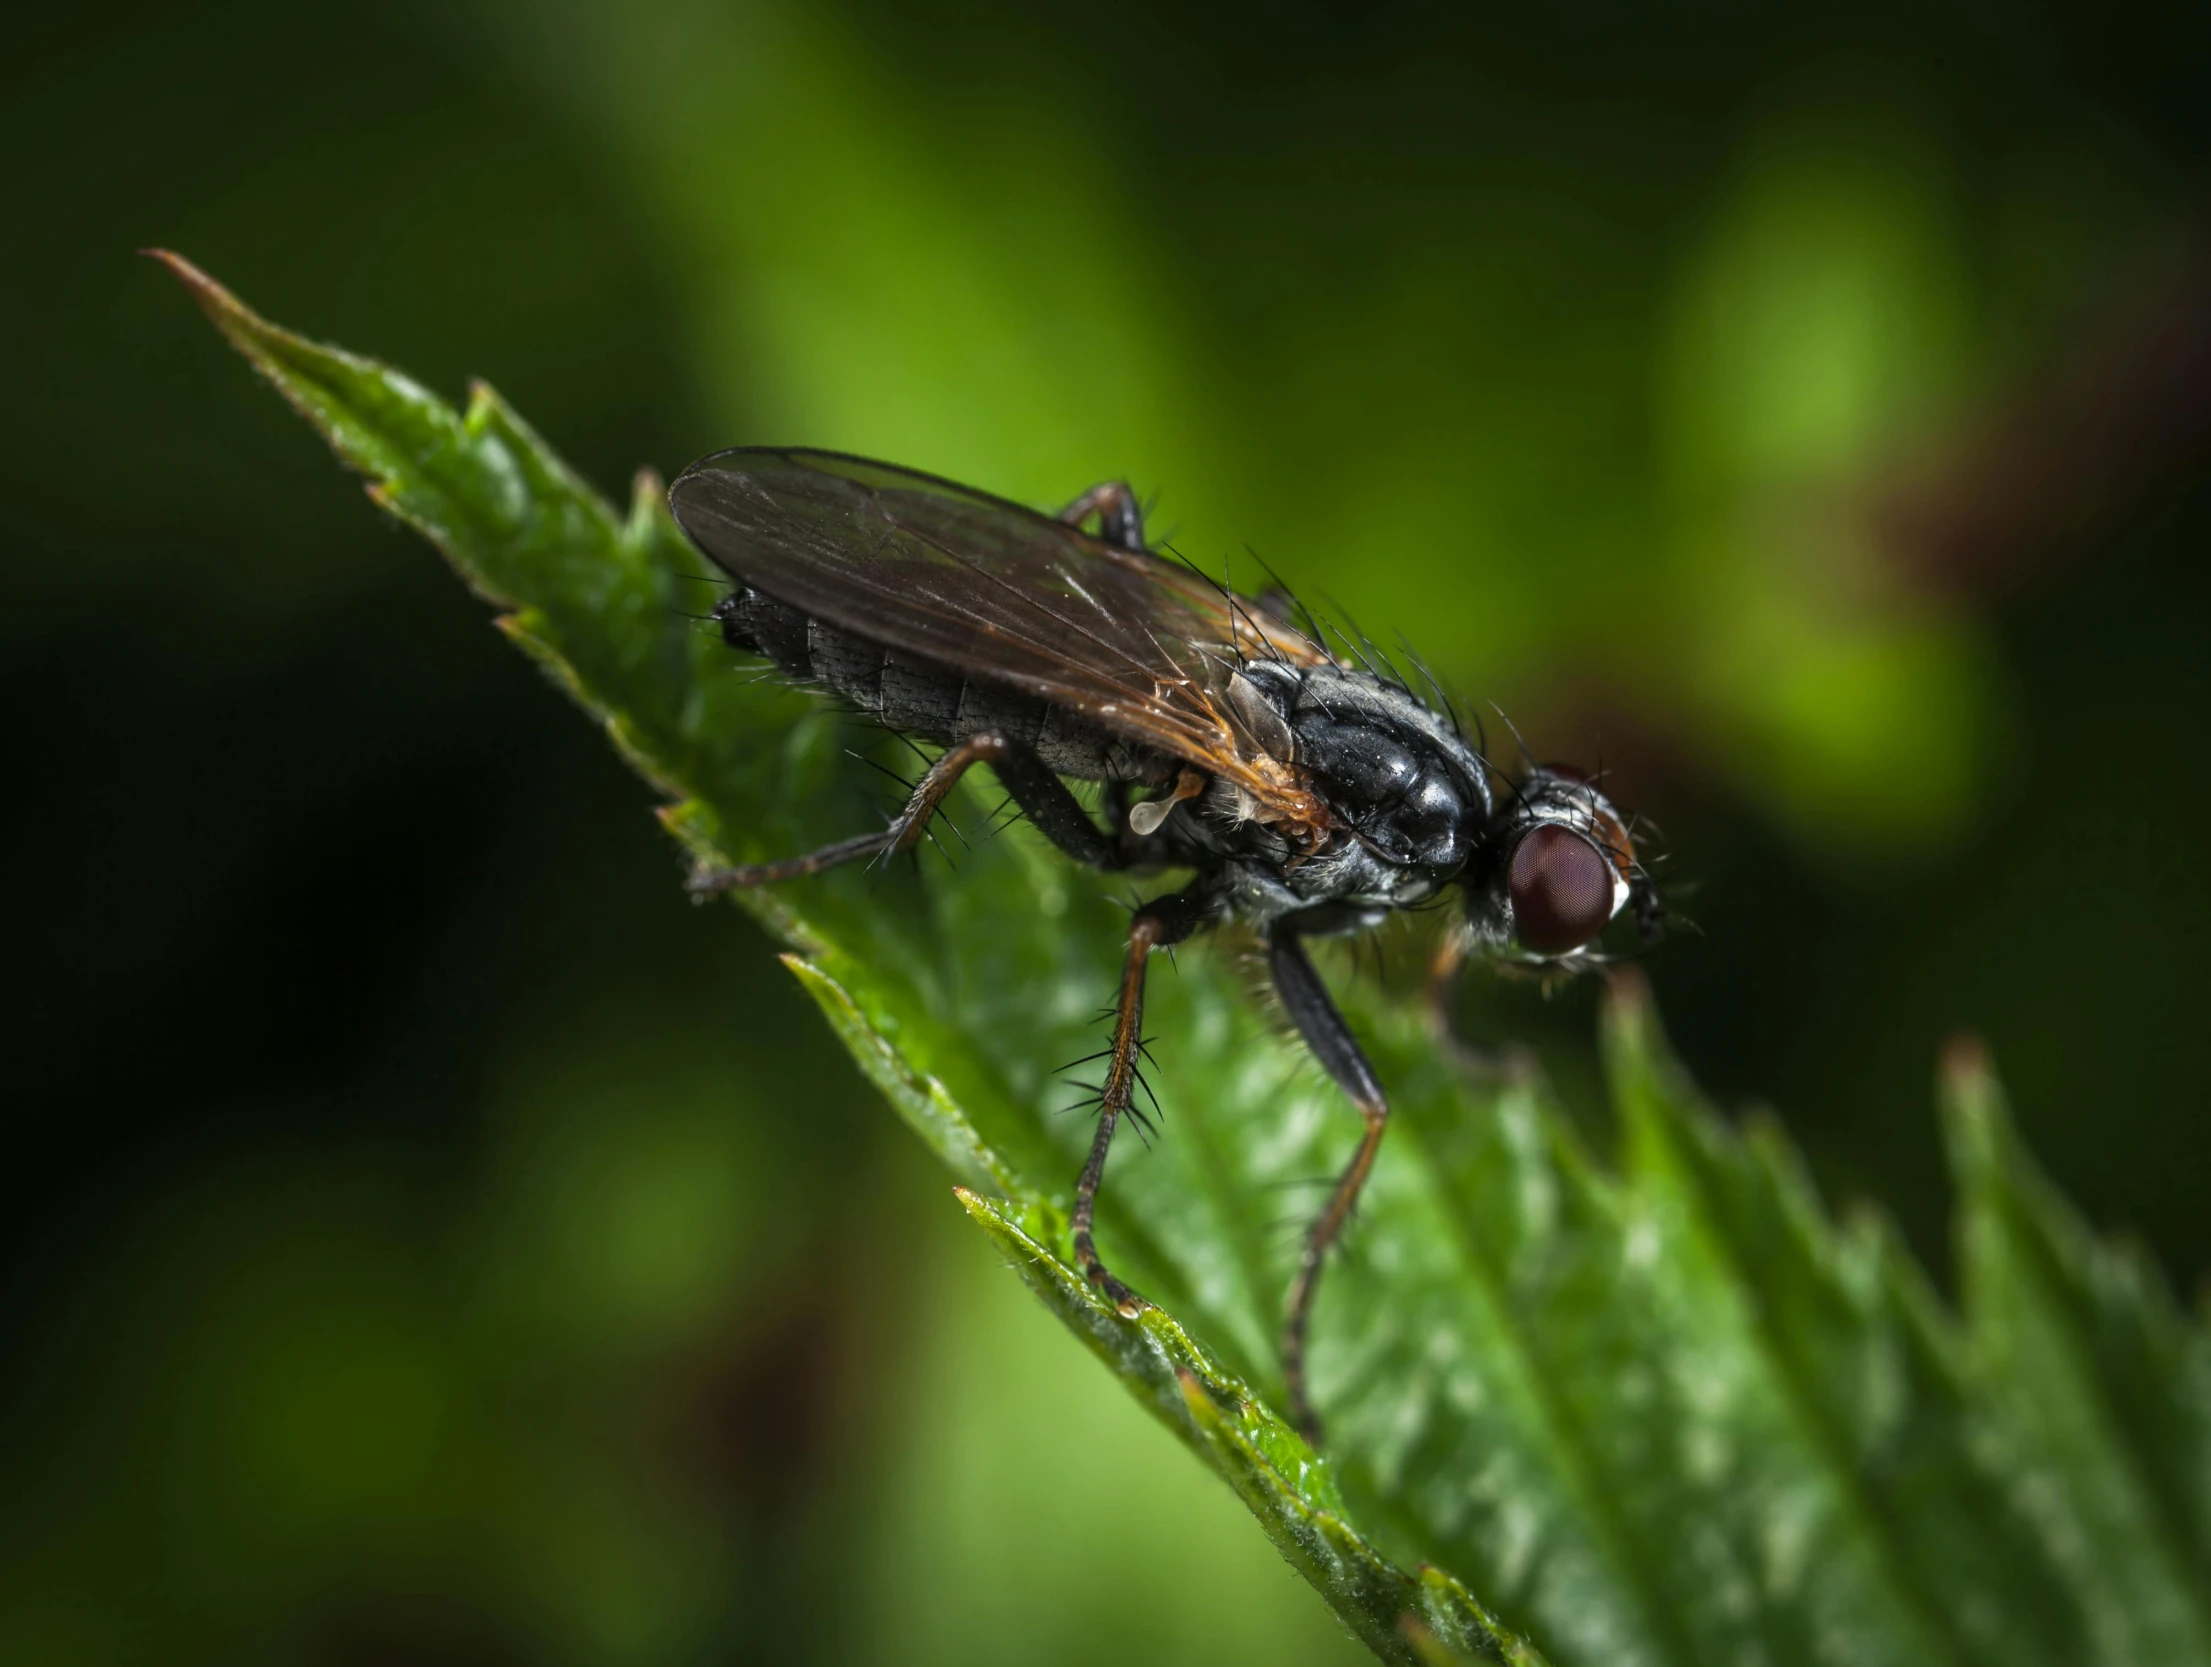 a close up of a fly on a leaf, pexels contest winner, hurufiyya, black, mid 2 0's female, full body in shot, avatar image